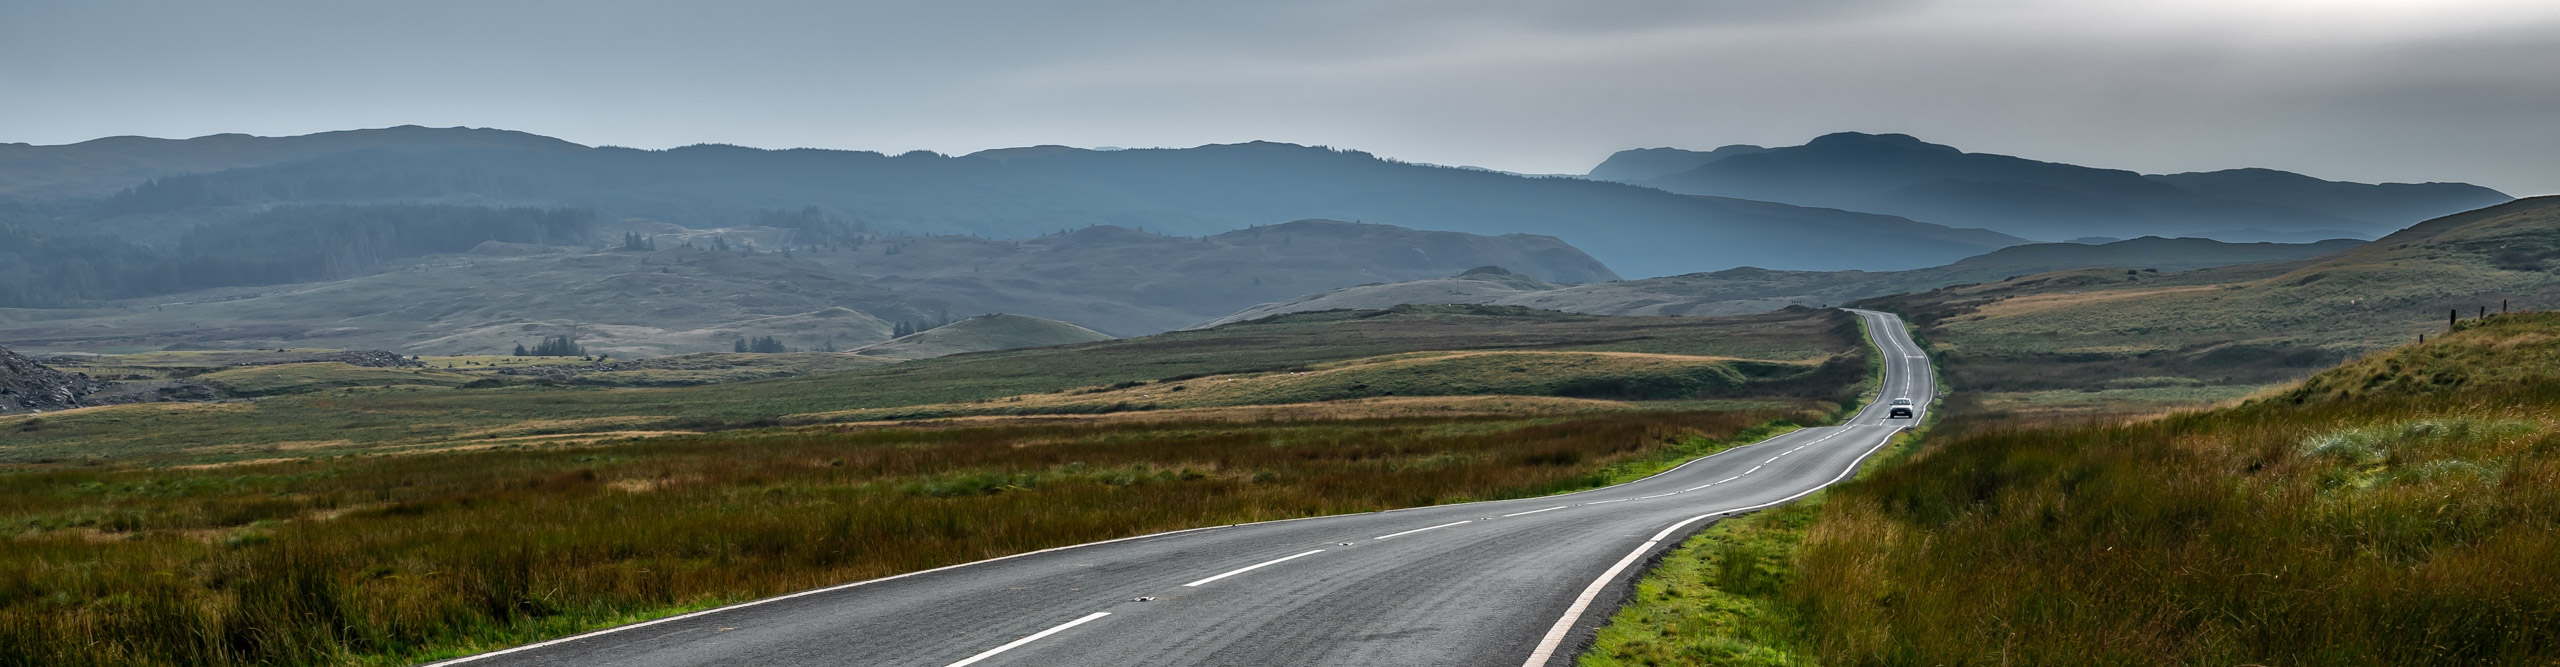 Road Through Spectacular Rural Landscape Of Snowdonia National Park In North Wales, United Kingdon